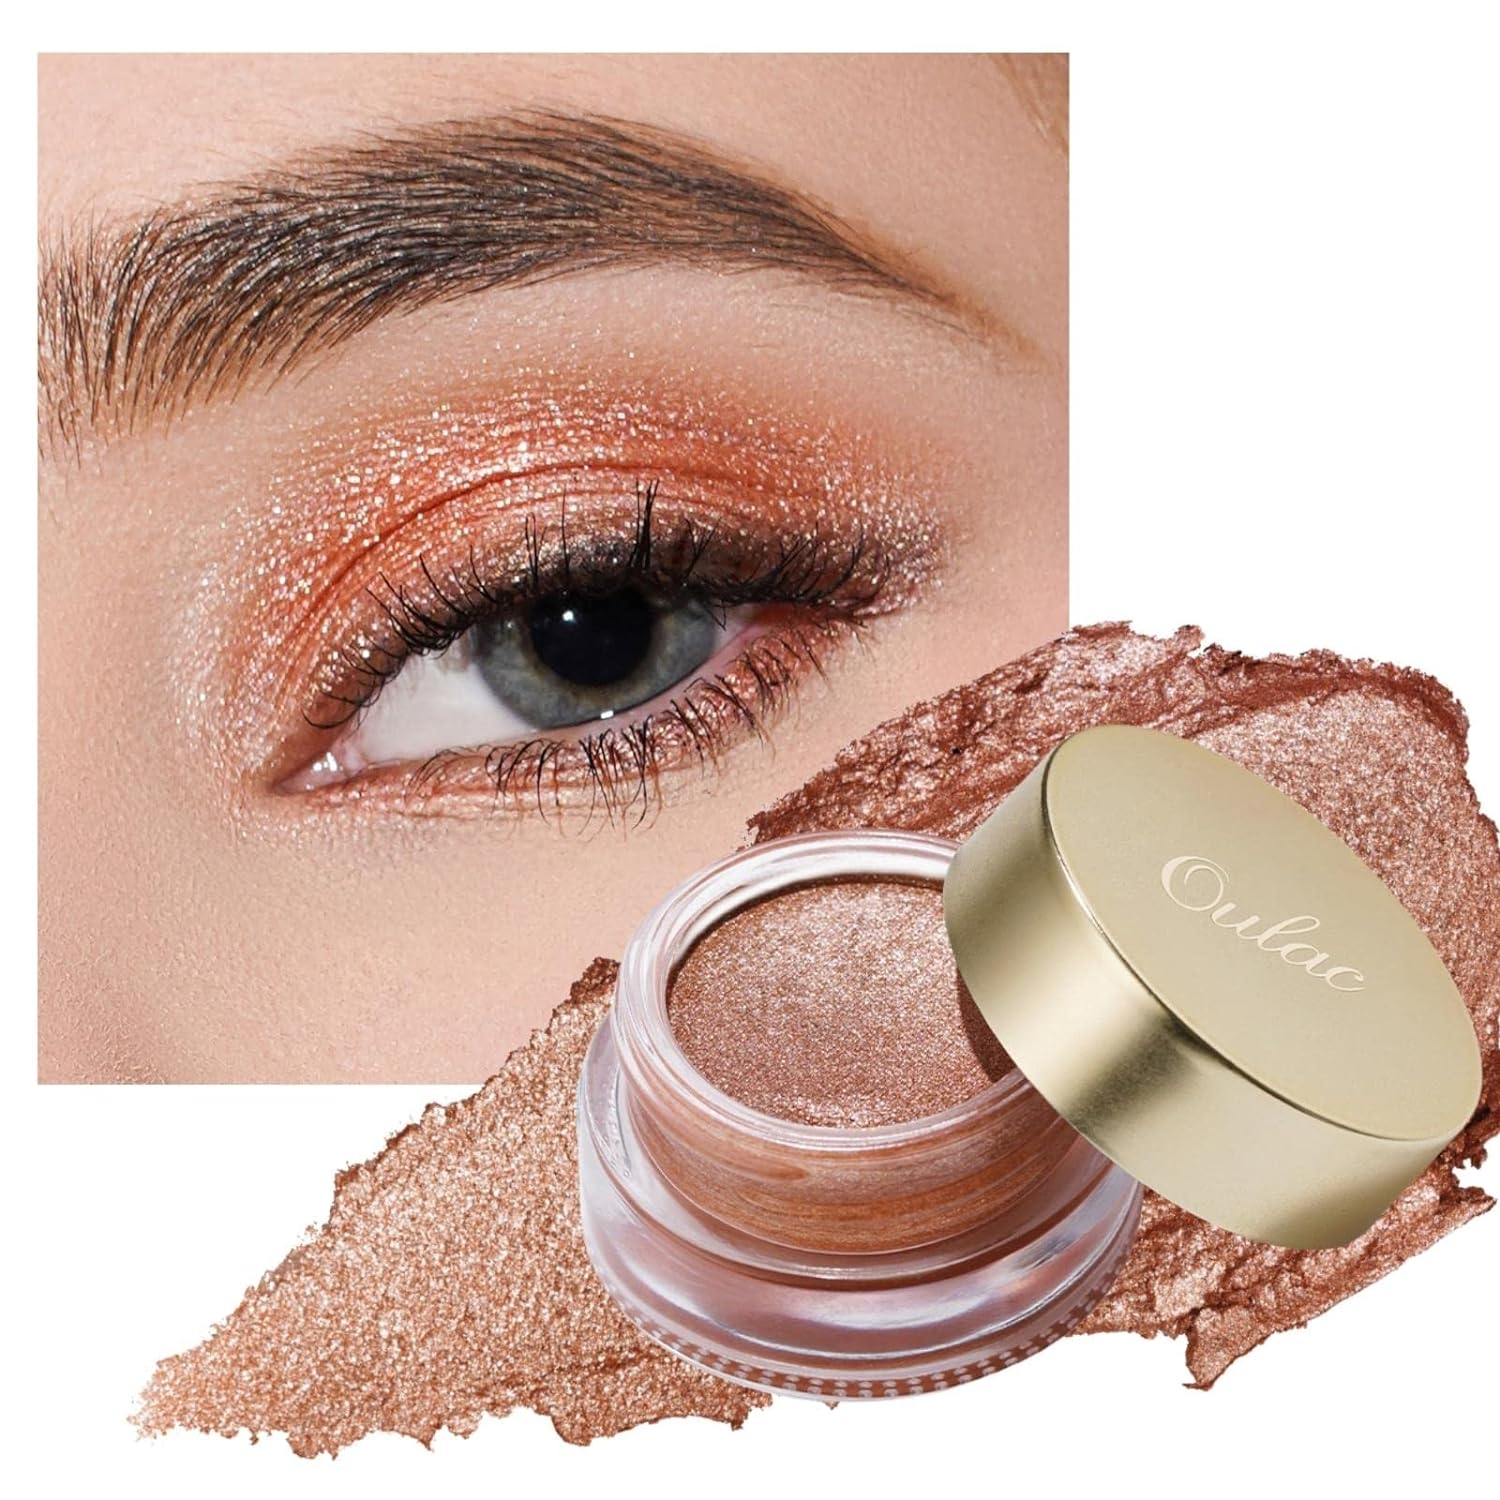 Oulac Warm Peach Glitter Cream Eyeshadow for Women with Moisturizing Smooth Formula. Multi-use for Highlighter, Highly Pigmented Metallic Shimmer Eye Makeup.Waterproof, Large Capacity 0.42 .(08)